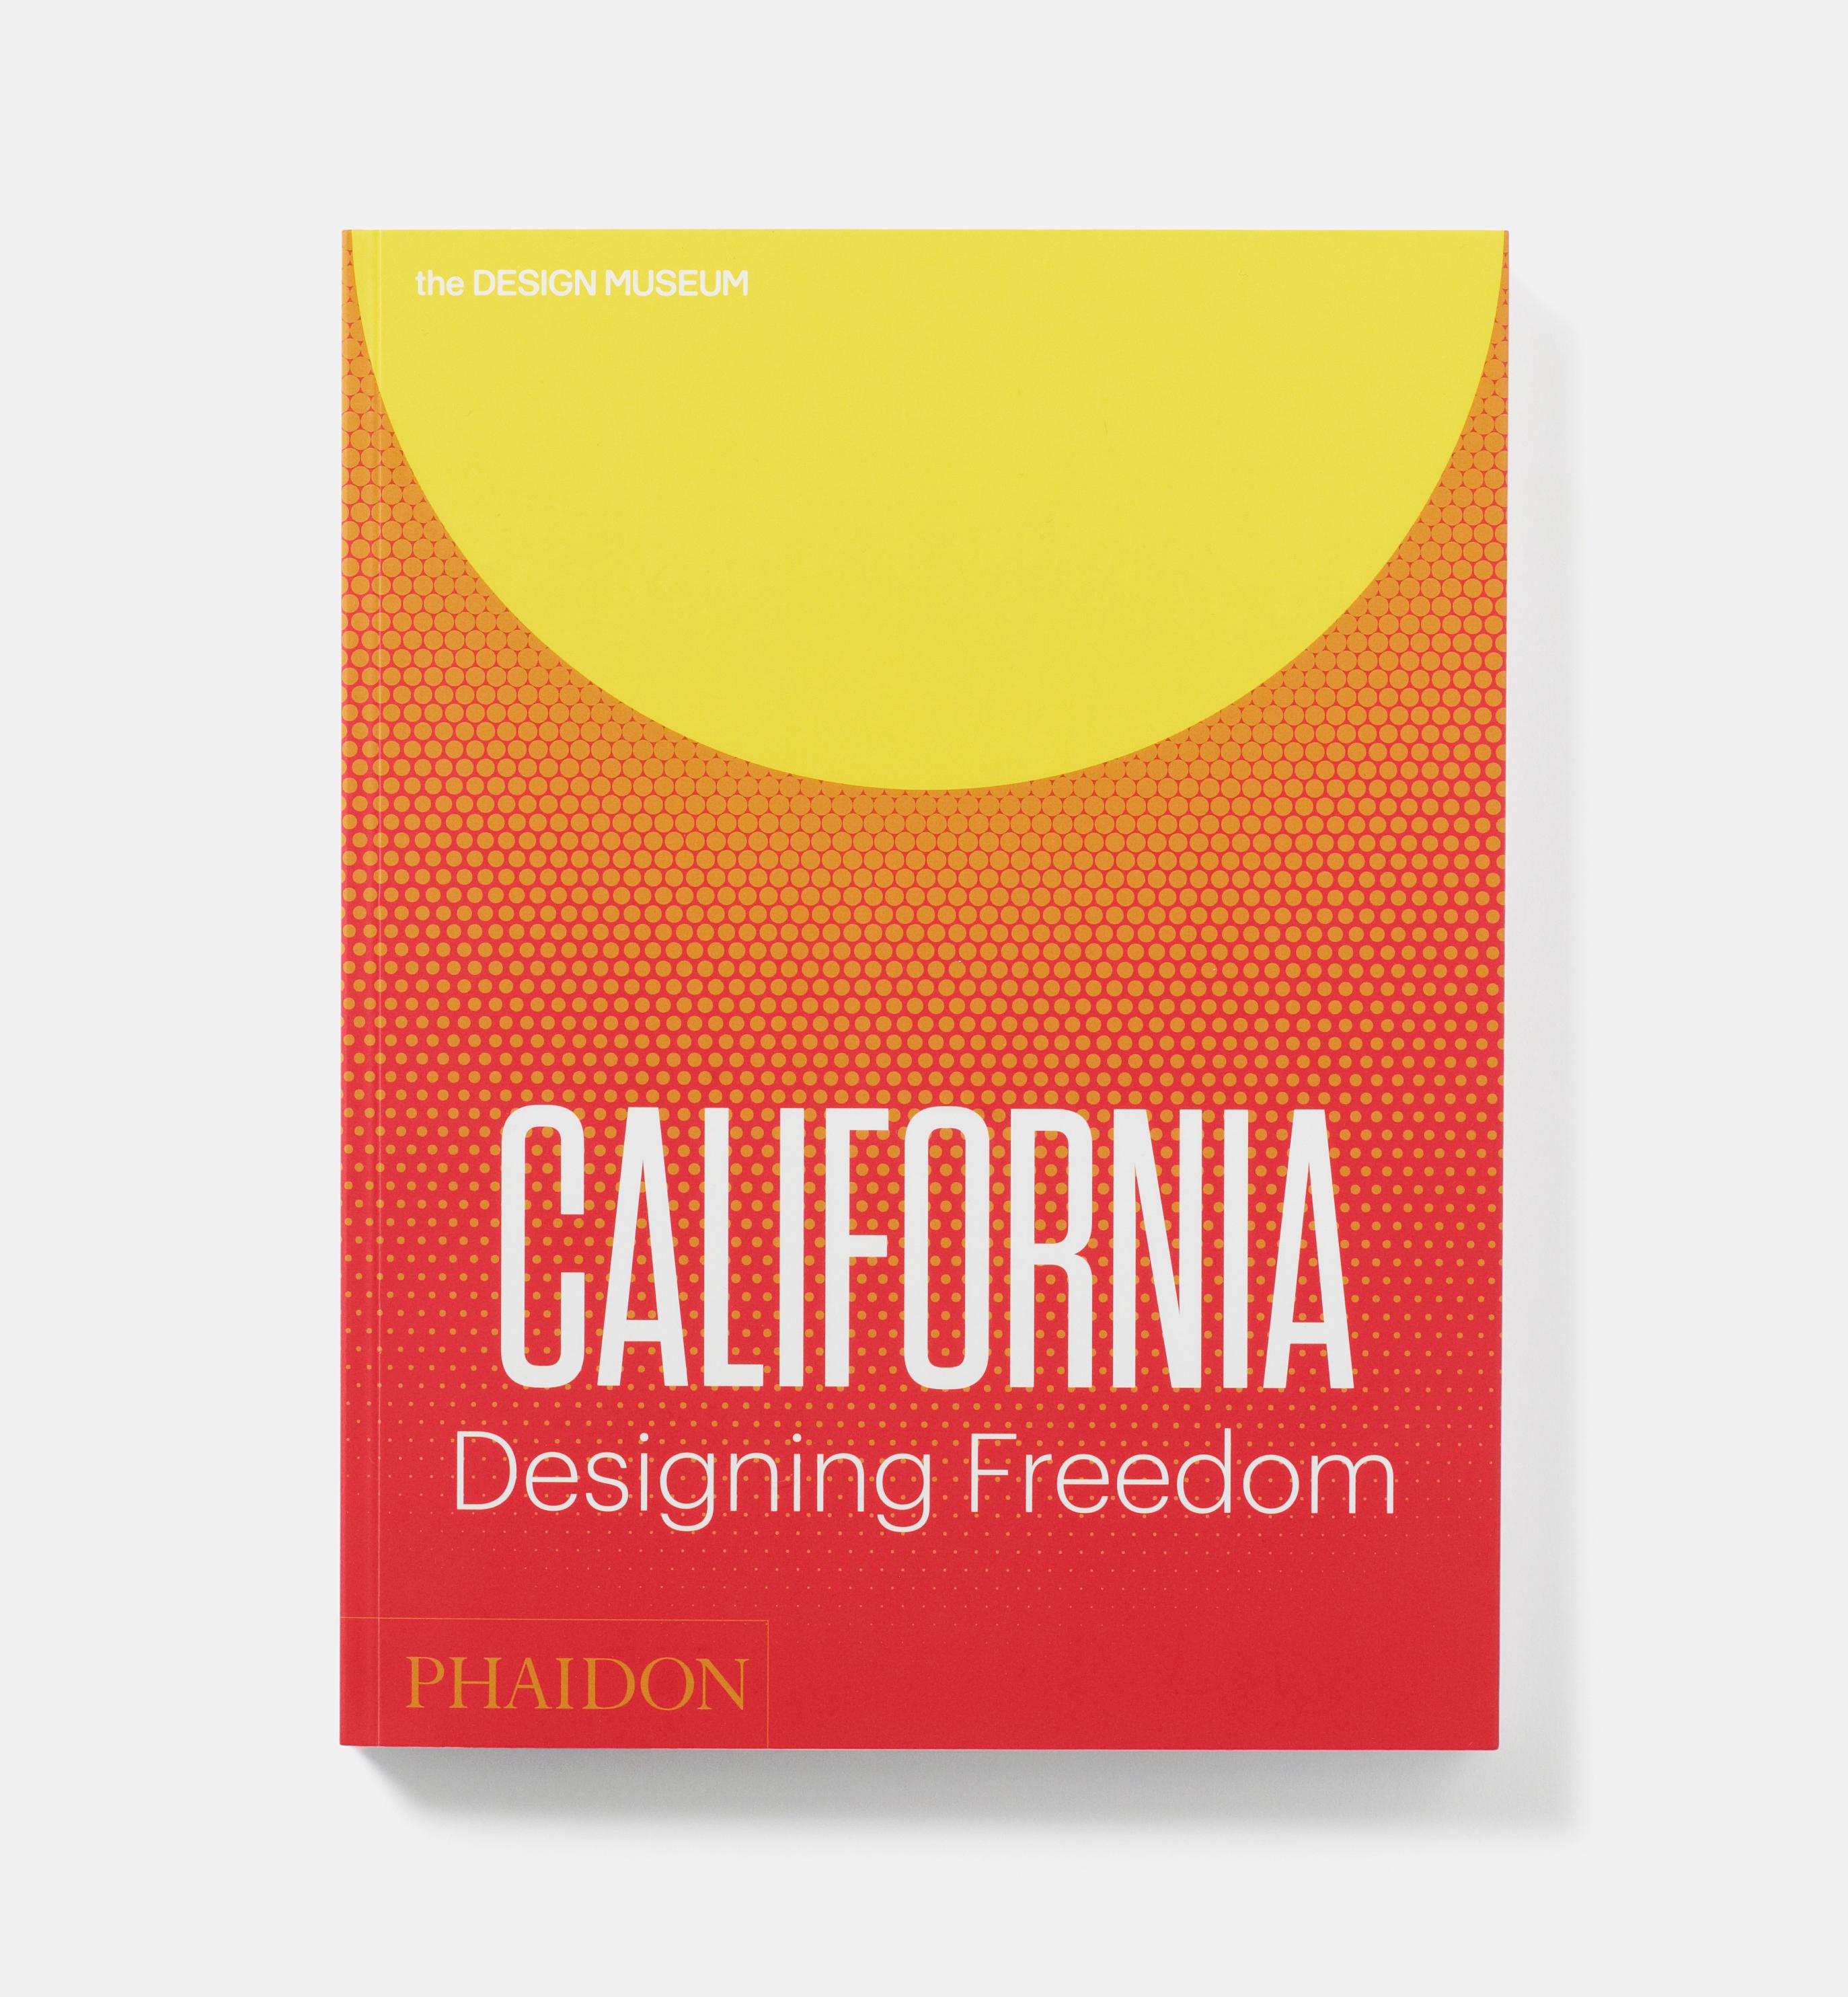 How did California come to have such a powerful influence on contemporary design? This book explores how the ideals of the 1960s counterculture morphed into the tech culture of Silicon Valley, and how 'Designed in California' became a global